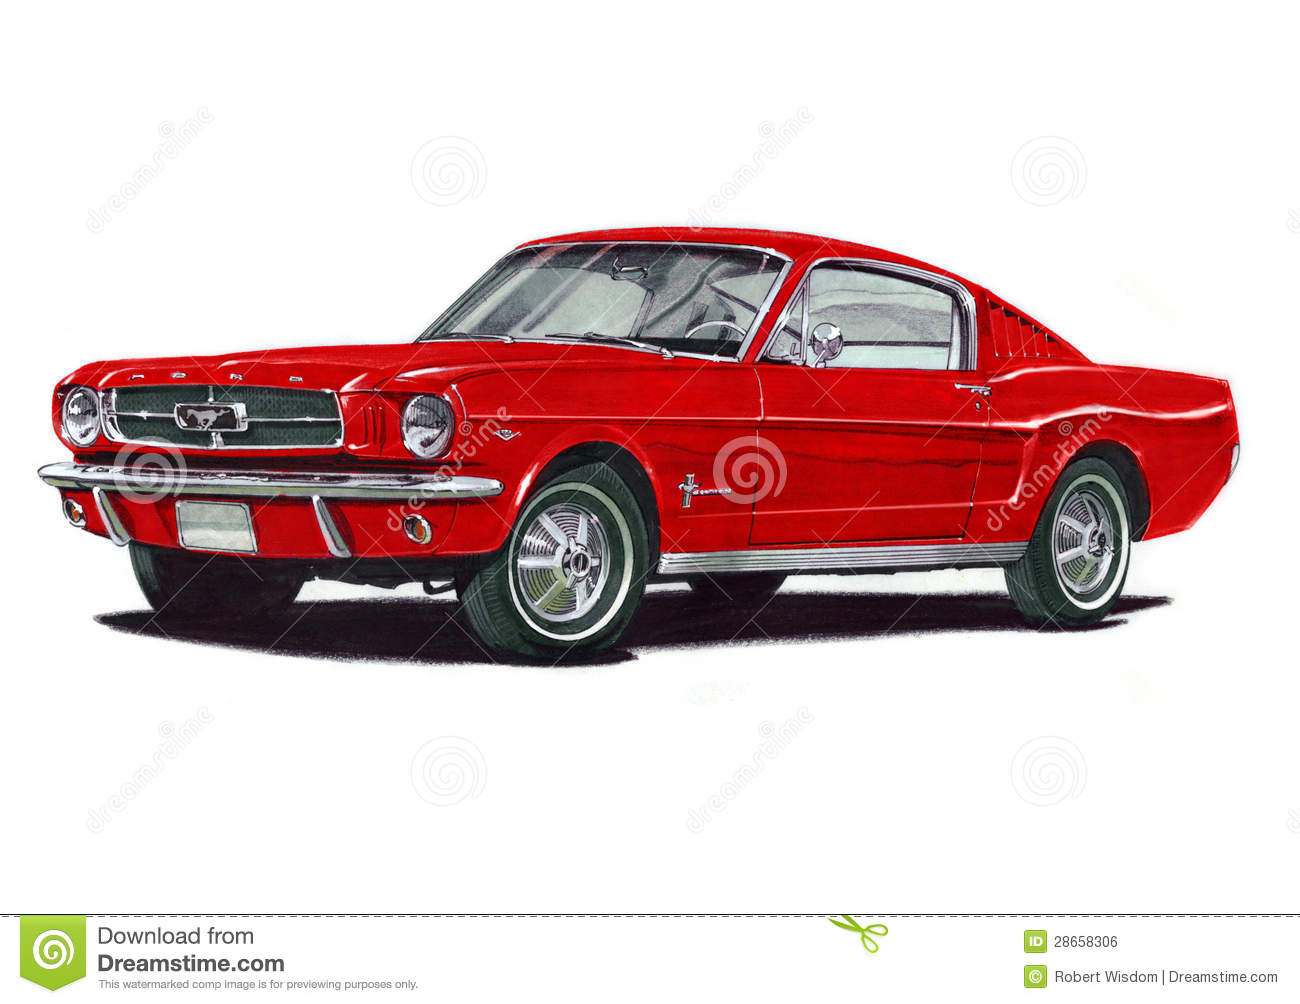 Ford Clipart Cliparts Of Car Free Download Wmf Eps Emf Svg